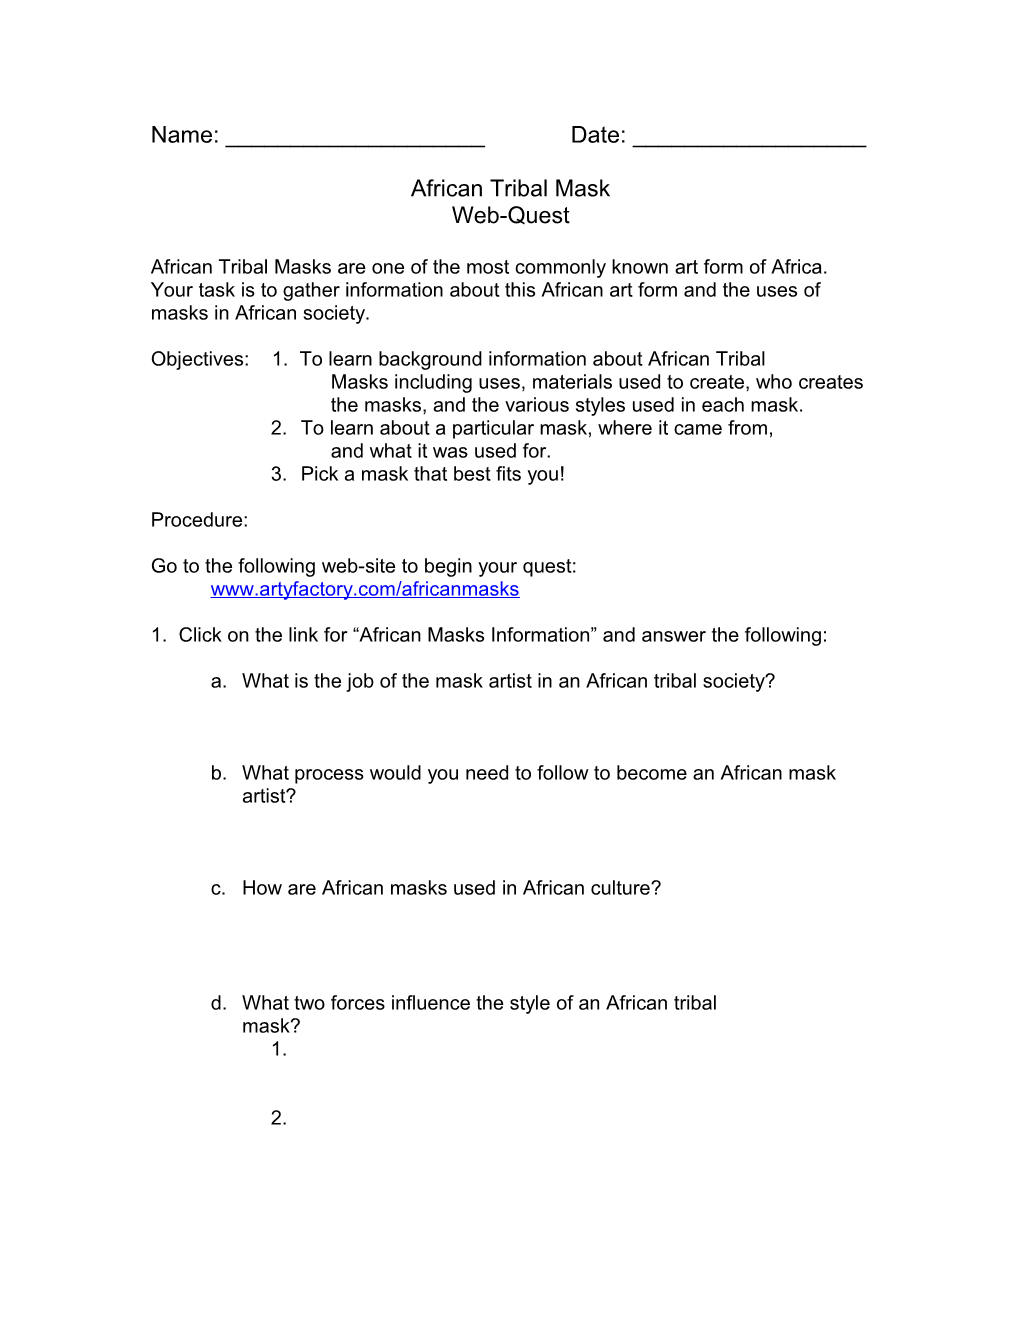 Objectives: 1. to Learn Background Information About African Tribal